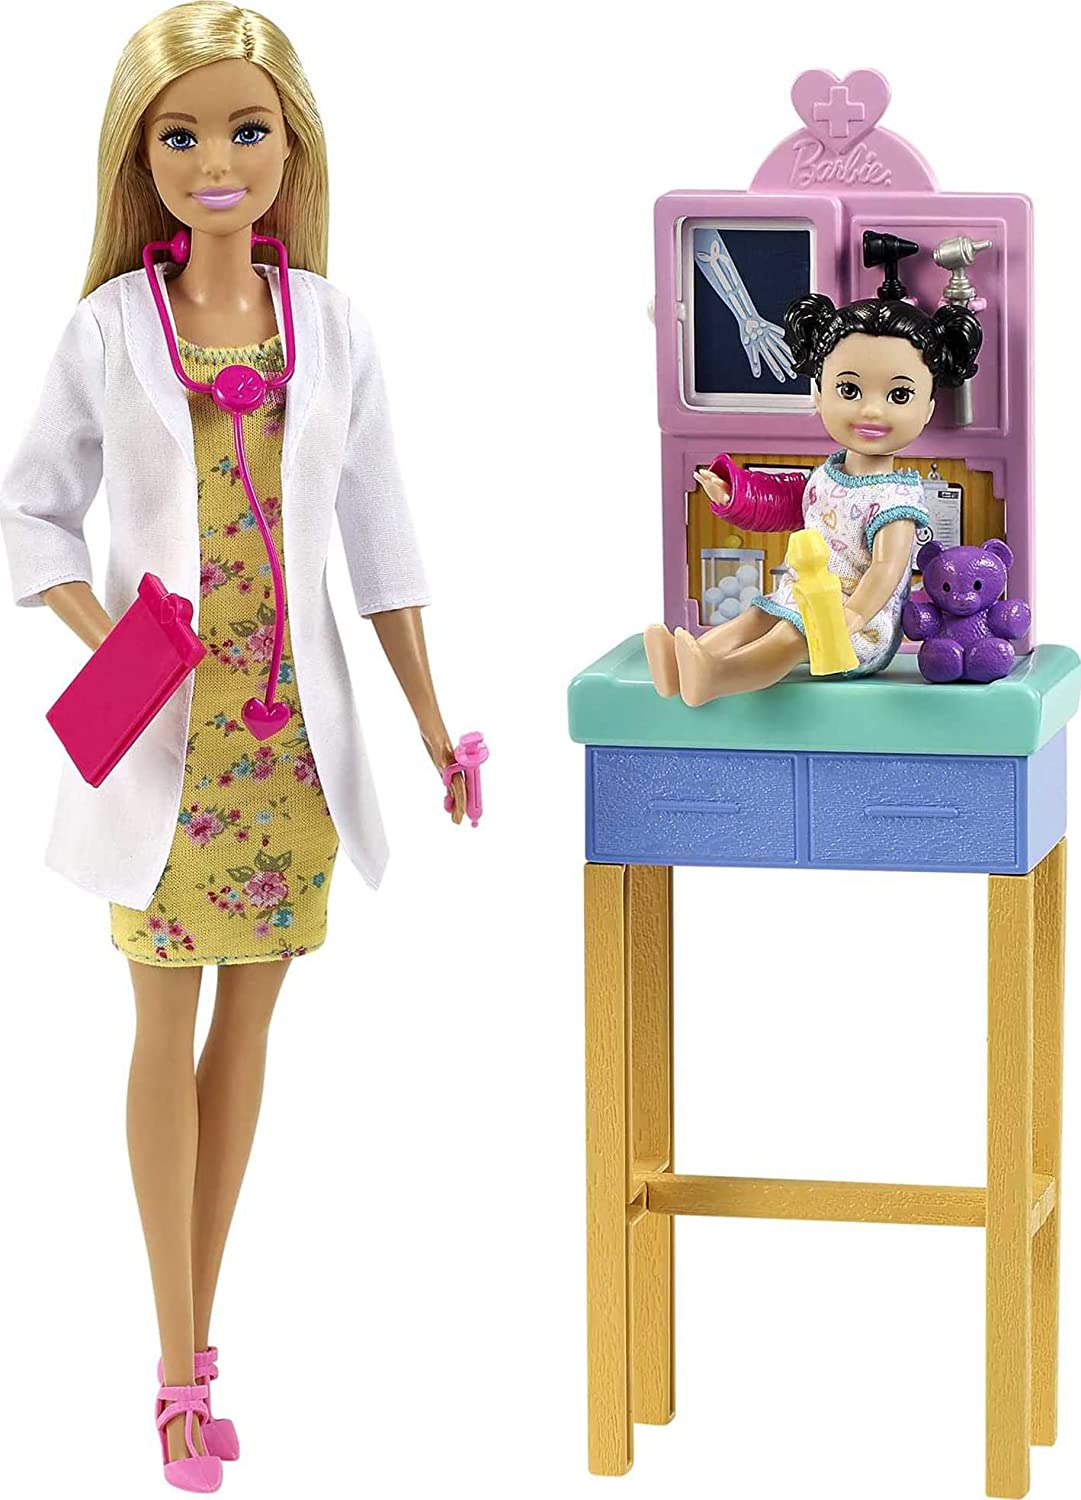 Barbie Pediatrician Playset w/ 12" Blonde Doll & Patient Doll $10.10 + Free Shipping w/ Amazon Prime or Orders $25+